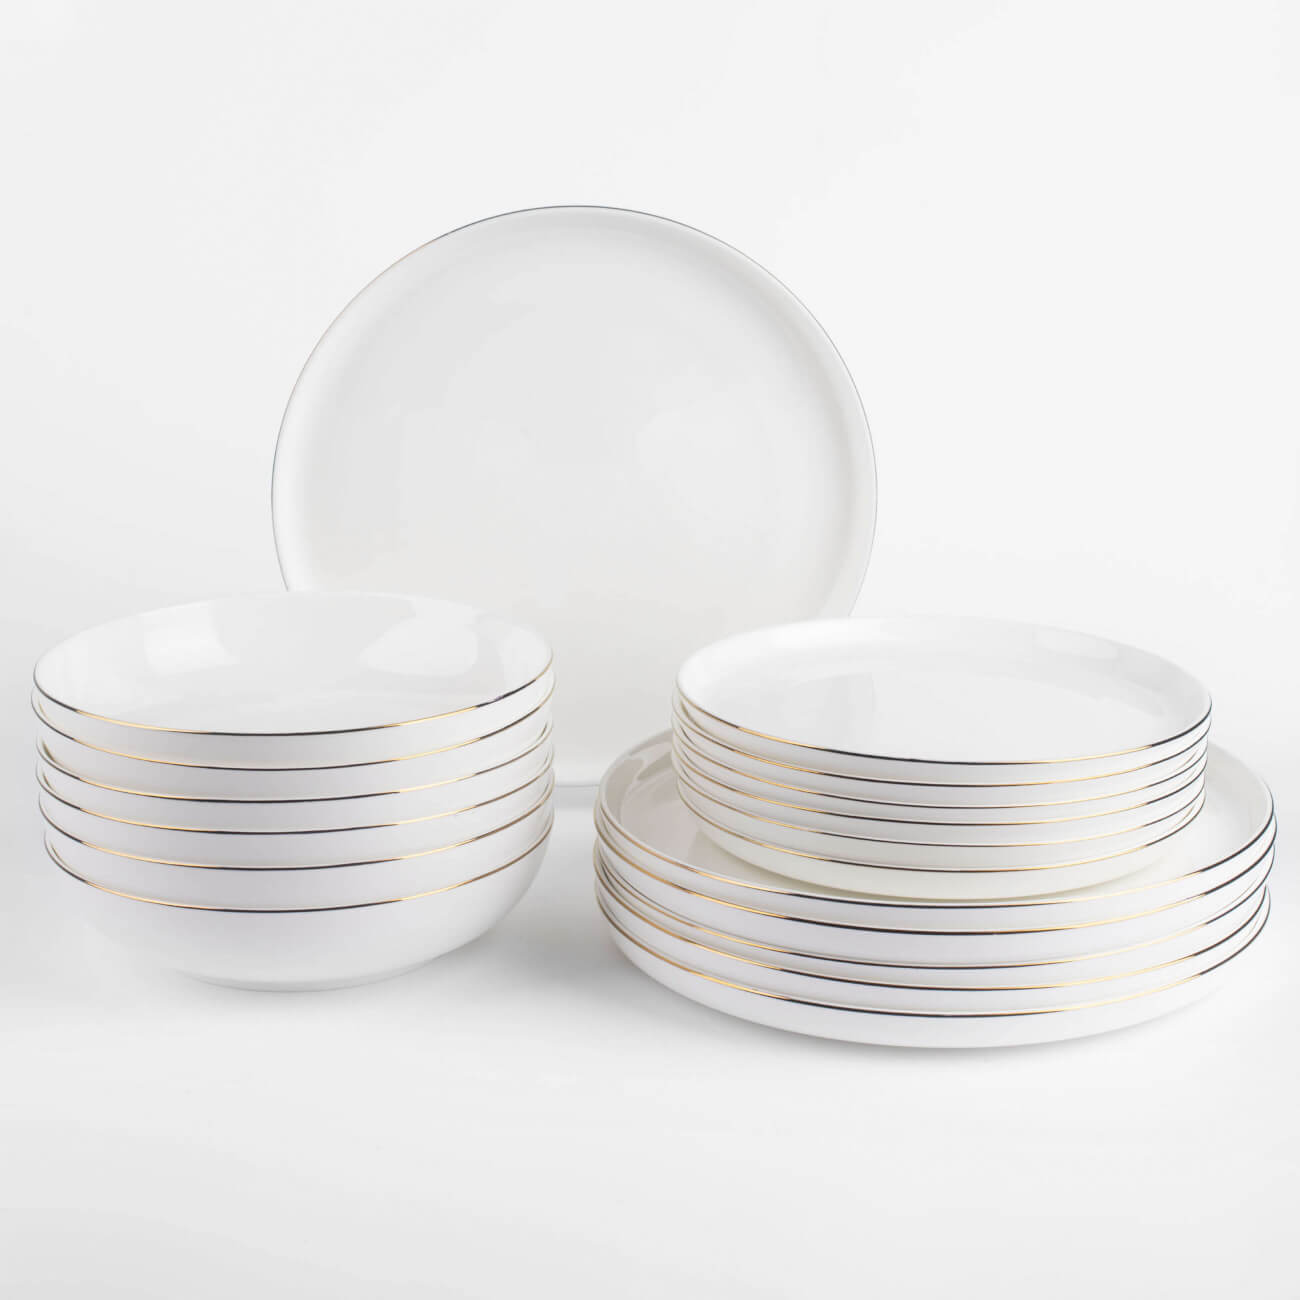 Dining set, 6 pers, 18 items, porcelain F, white, Ideal gold изображение № 1